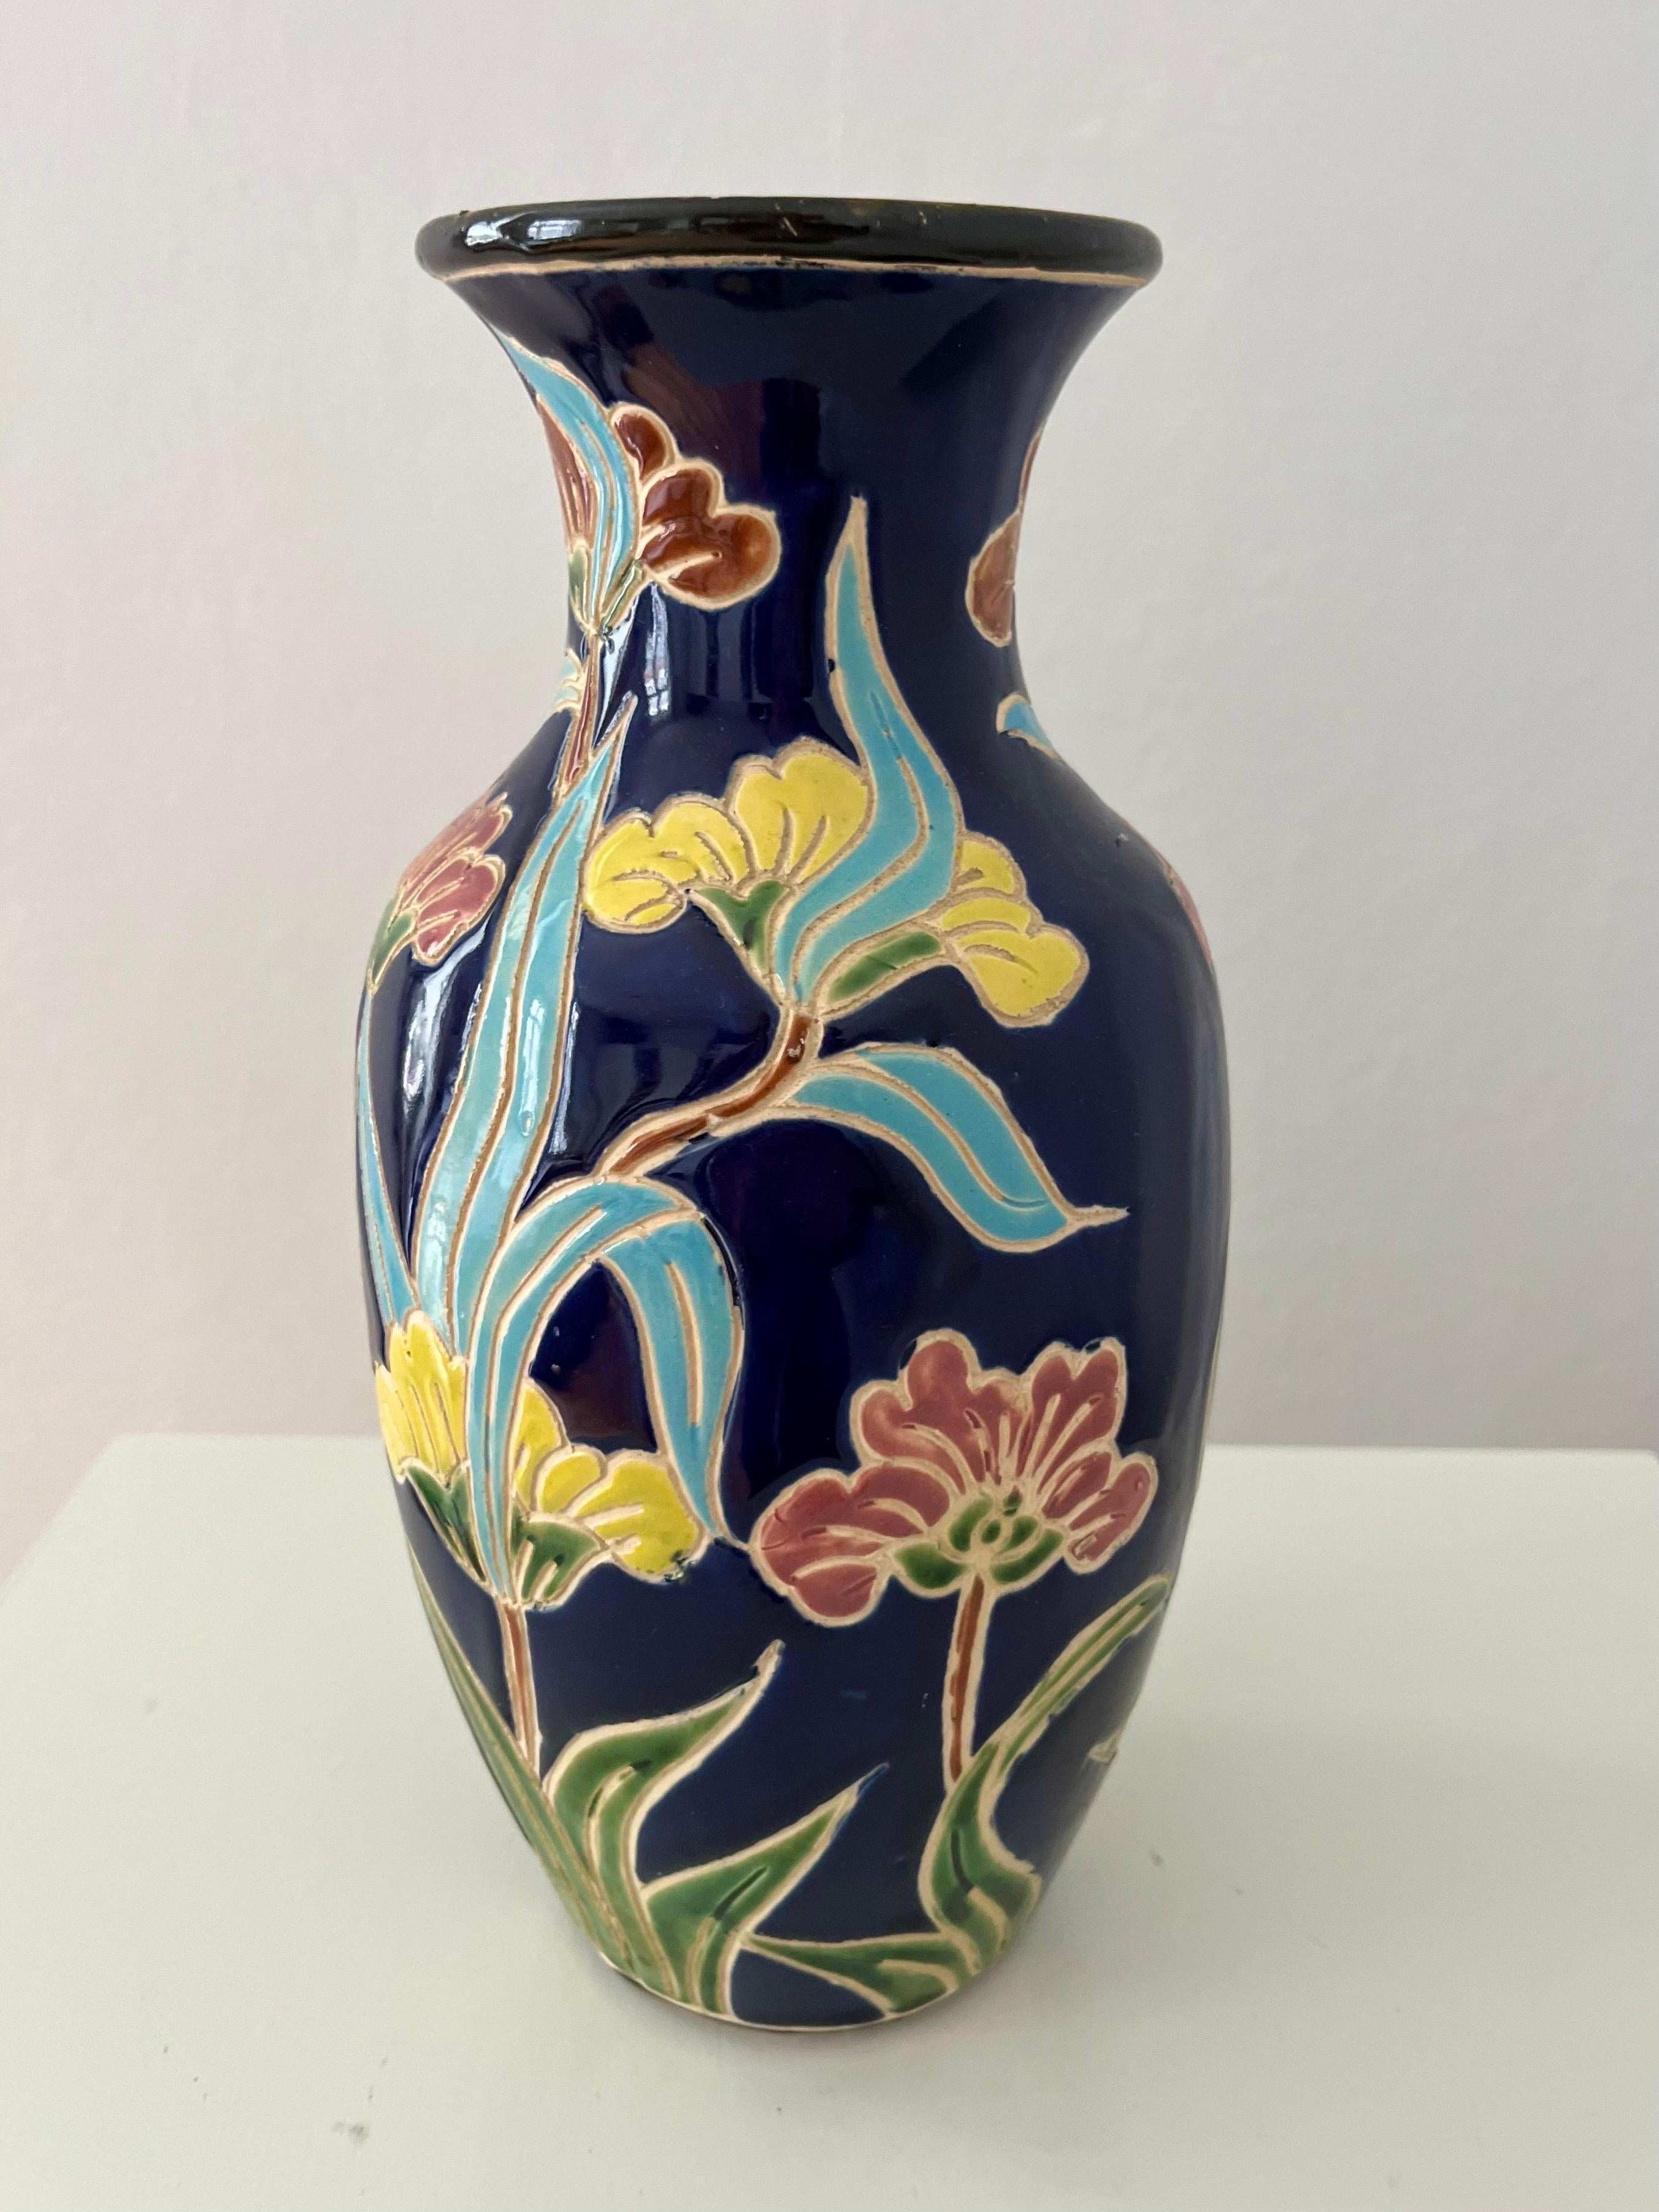 1960s/1970s Scandinavian Organic Modern Ceramic Vase with Colorful Floral Motifs For Sale 1